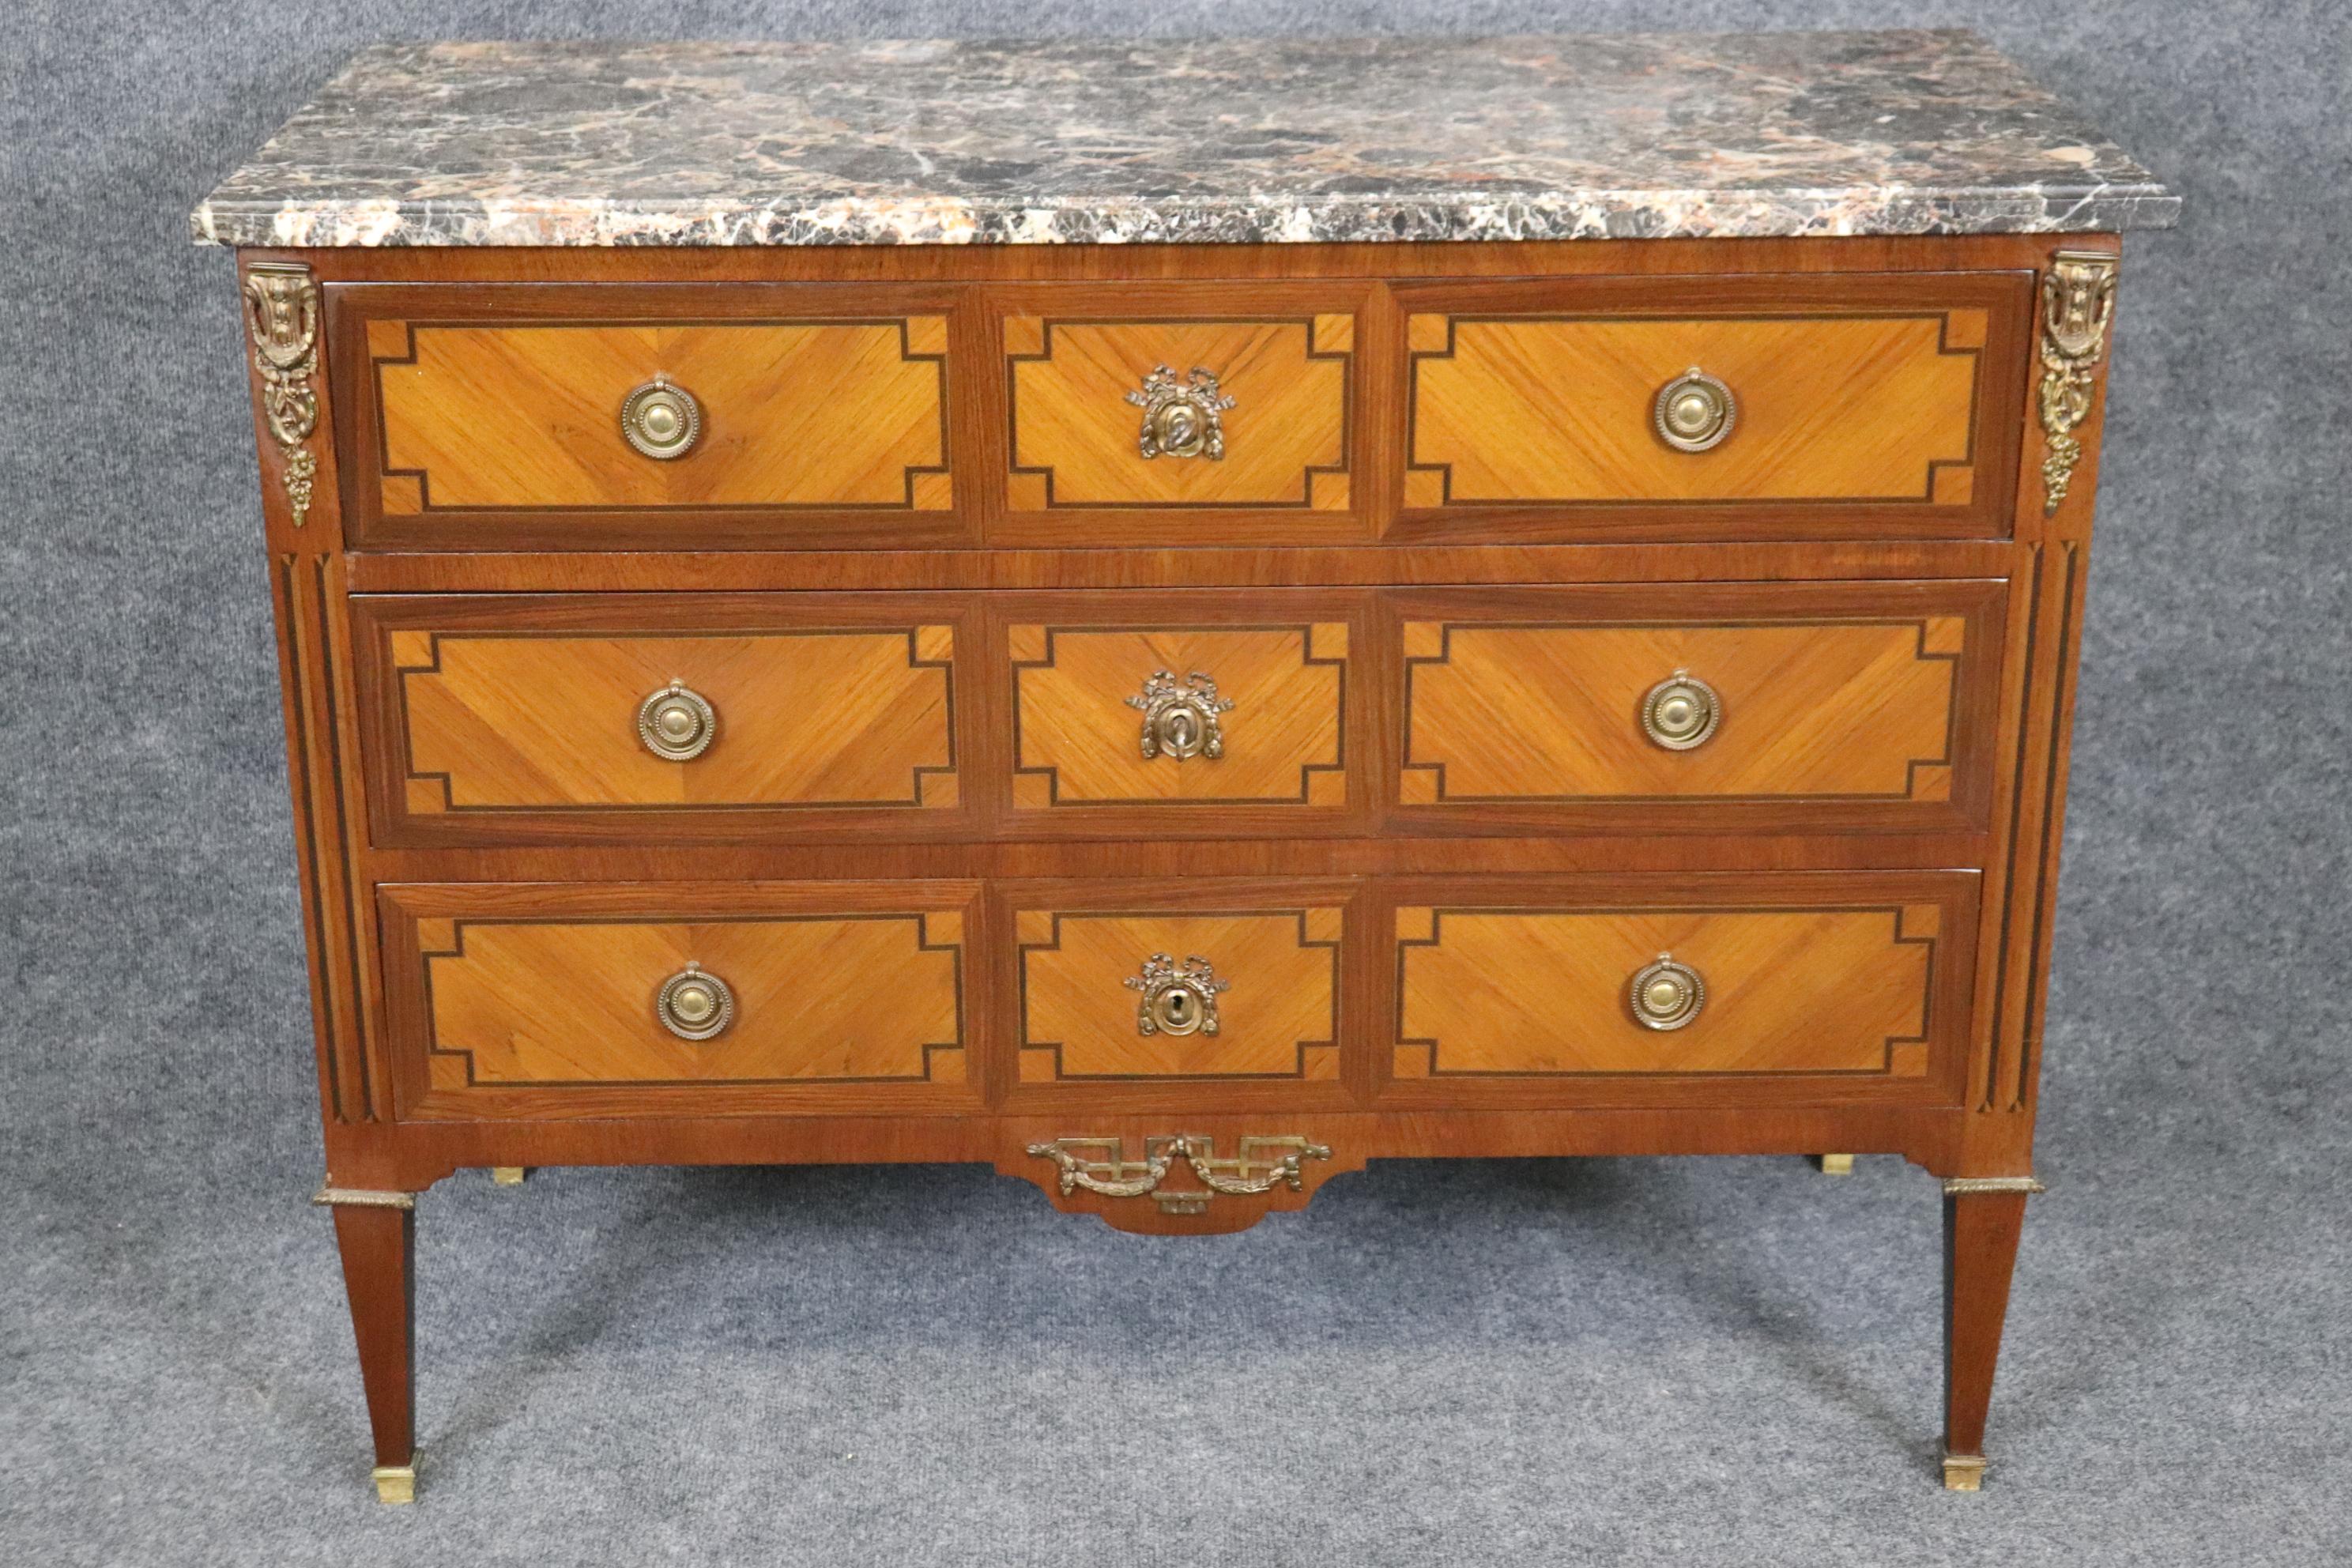 This is a beautiful commode in the Directoire style or Louis XVI style. The commode features kingwood and walnut in contrasting hues and beautiful bronze. The piece features a beautiful marble top and is in good antique condition with minor signs of